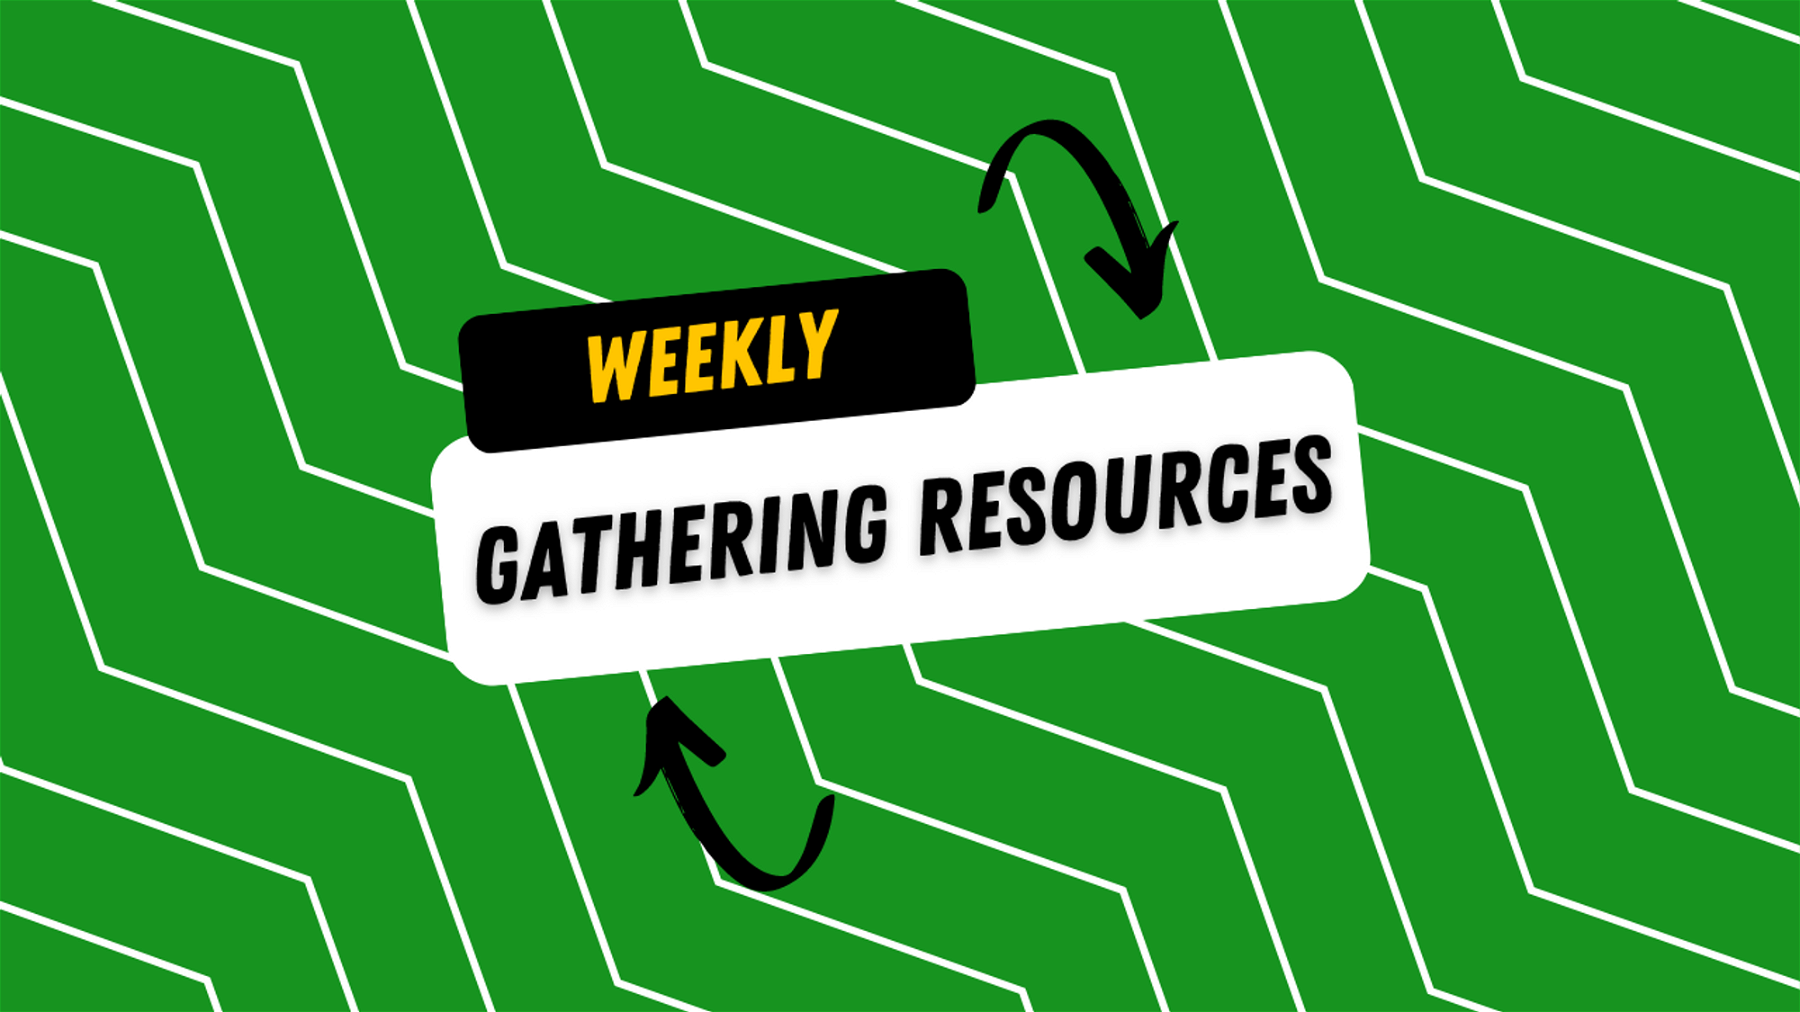 🙏🏻 Weekly Gathering Resources